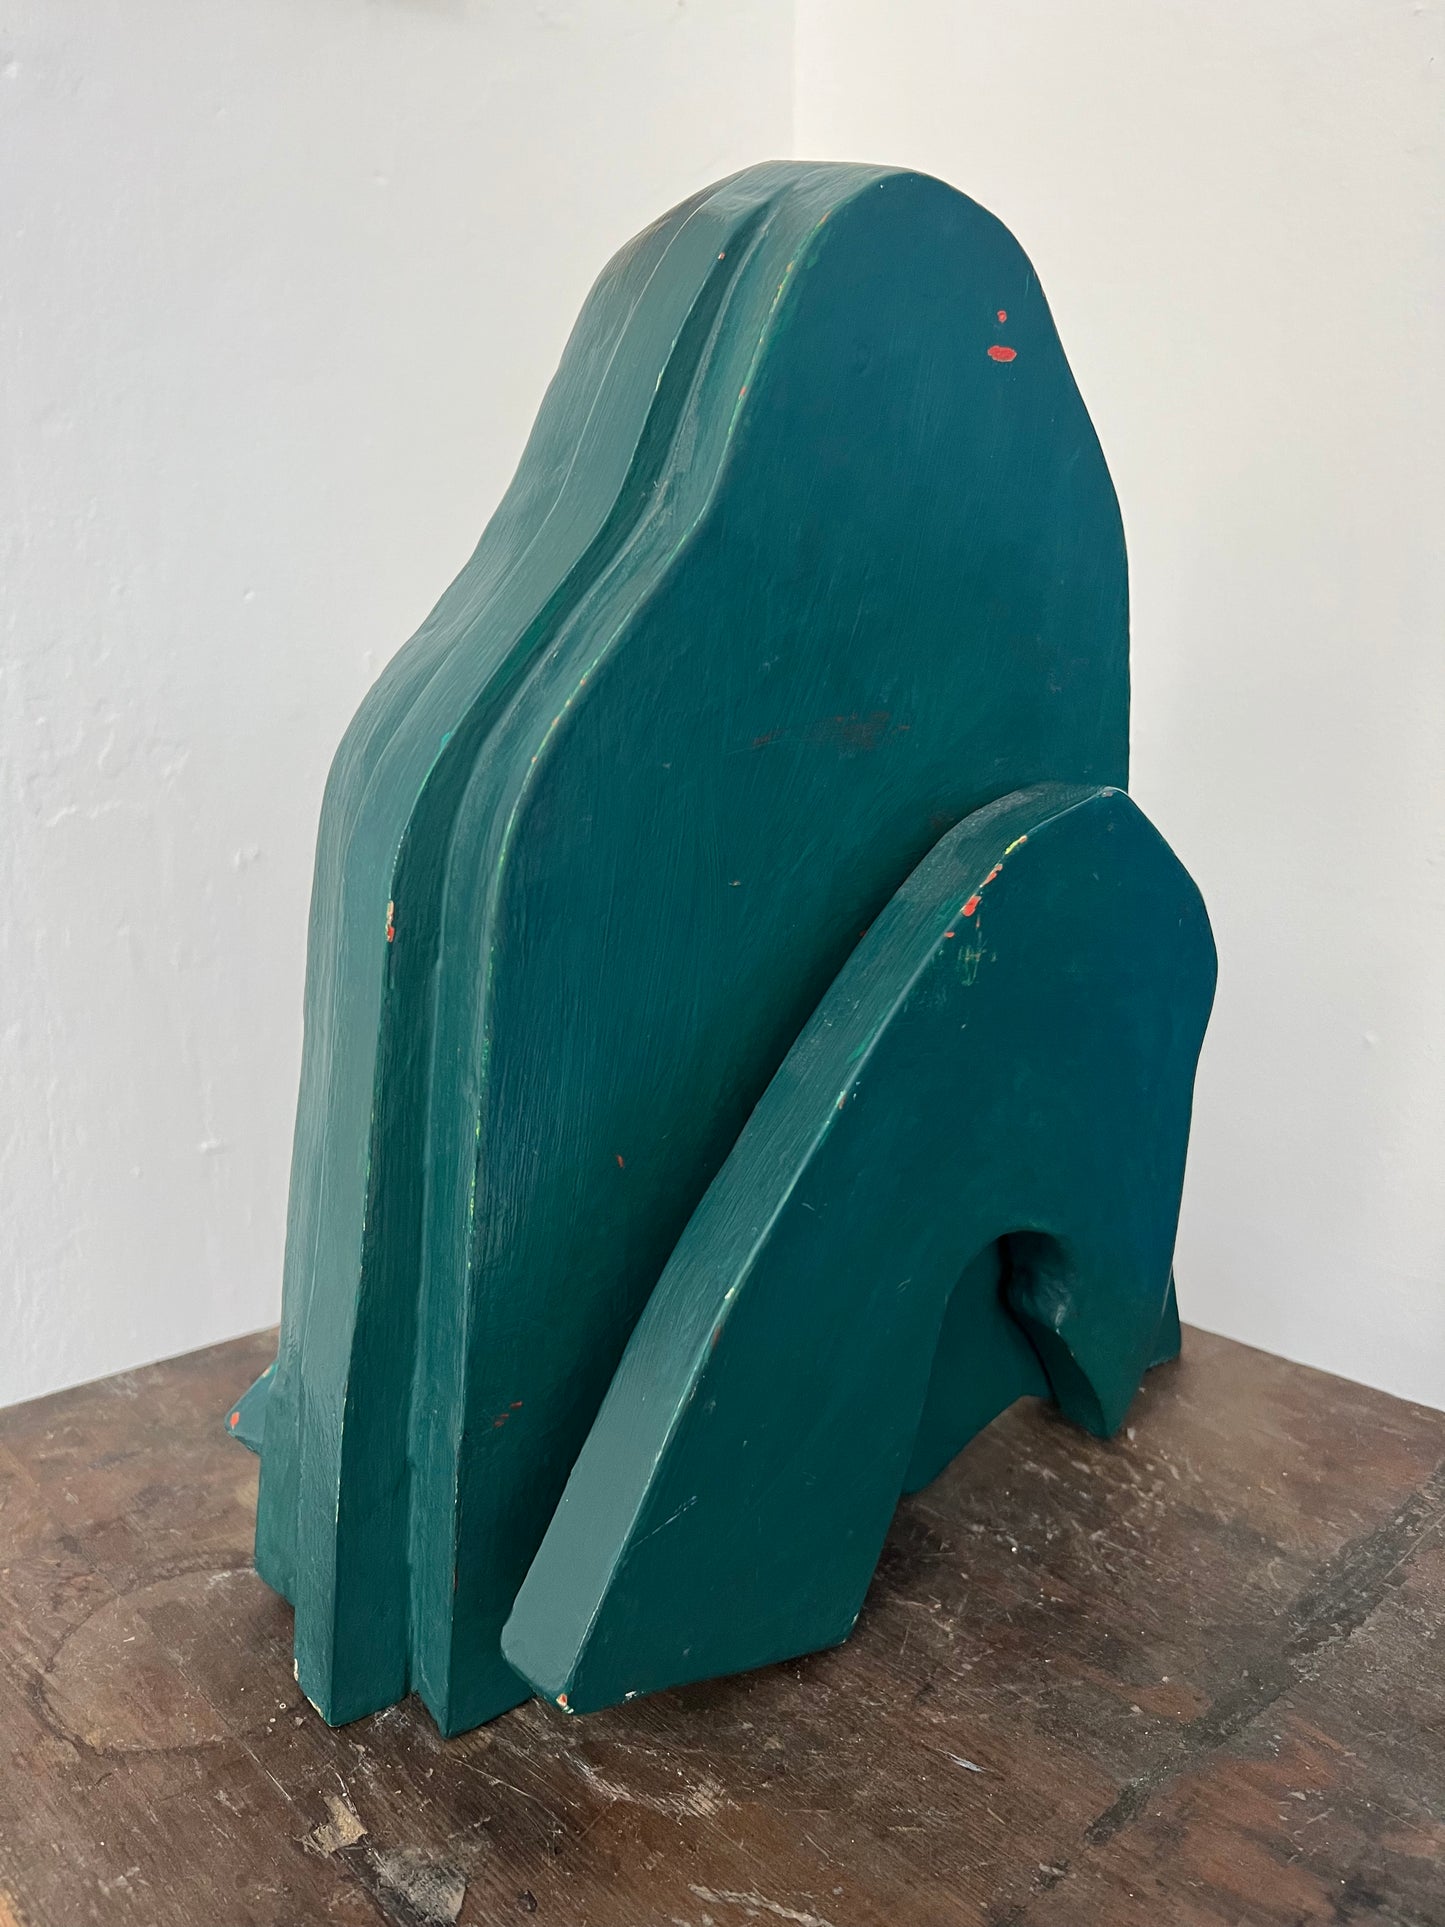 Helle Thorborg. Sculpture of painted wood, 1970’s